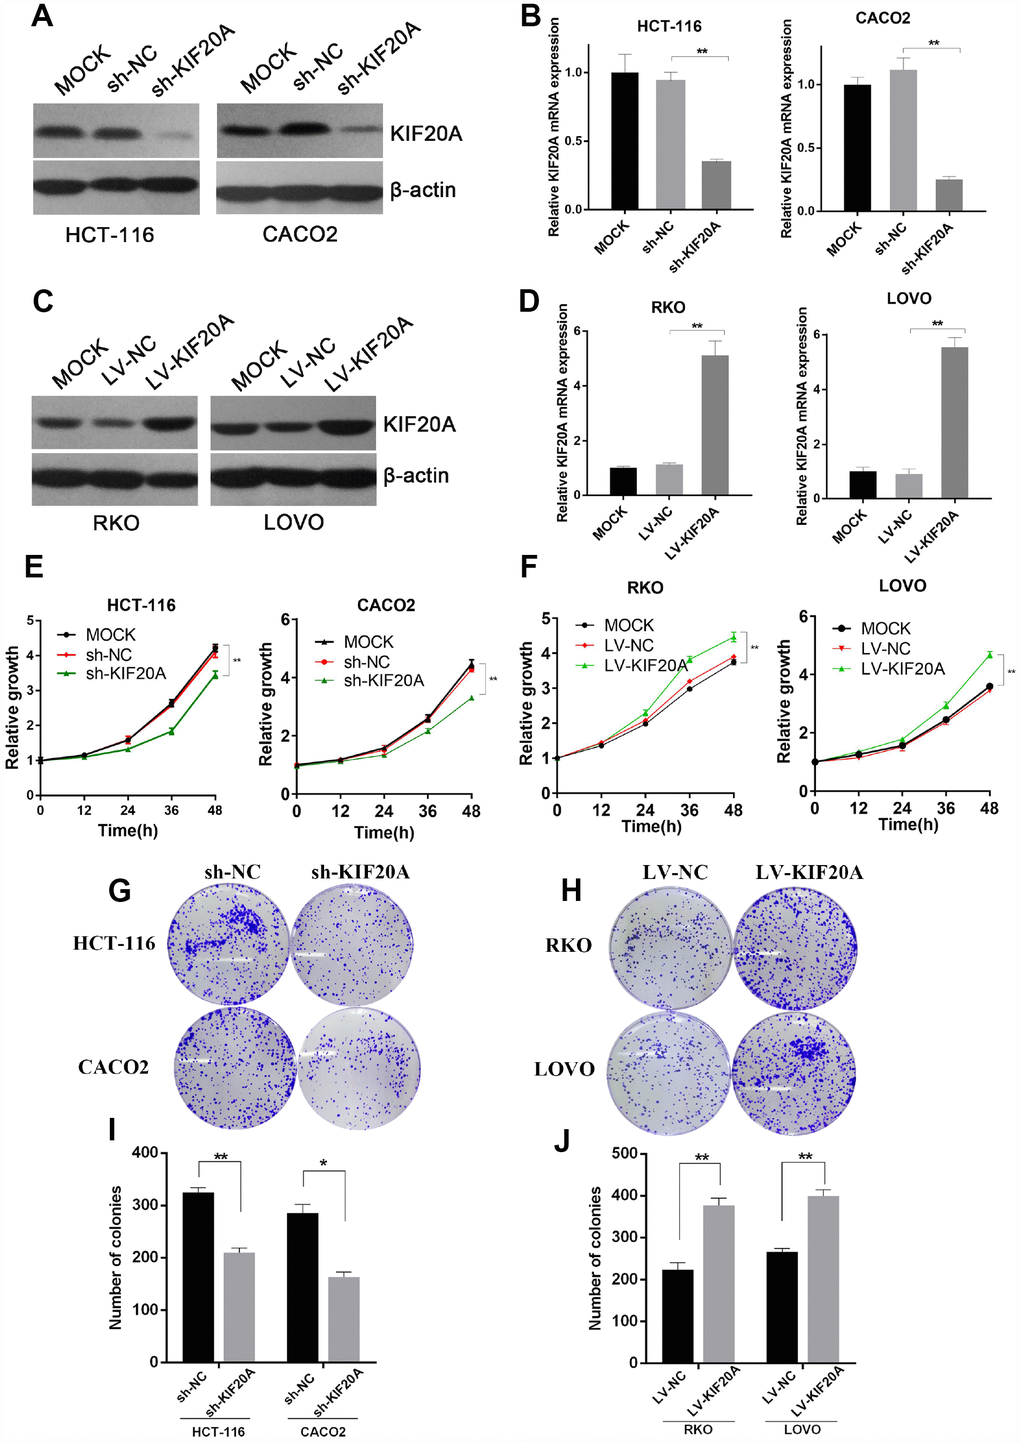 KIF20A improves malignant behaviors in CRC. (A and B) Western blot and RT-qPCR analysis of KIF20A in constructed cell lines. Mock represents blank groups. Sh-NC represents lentivirus-mediated control groups. Sh-KIF20A represents lentivirus-mediated KIF20A silencing groups. (C and D) Western blot and RT-qPCR analysis of KIF20A in constructed cell lines. Mock represents blank groups. Lv-NC represents lentivirus-mediated control groups. Lv-KIF20A represents lentivirus-mediated KIF20A overexpression groups. (E) The relative growth rates in KIF20A knockdown CRCs were measured using CCK-8 analysis and compared between 3 groups at indicated times in two different cell lines. Data are presented as mean ± SEM. *P P F) The relative growth rates in KIF20A overexpression CRCs were measured using CCK-8 analysis and compared between three groups at indicated times in two different cell lines. Data are presented as mean ± SEM. *P P G–J) Colony formation of 4 different cell lines transfected with different treatments. Data are presented as mean ± SEM. *P P 